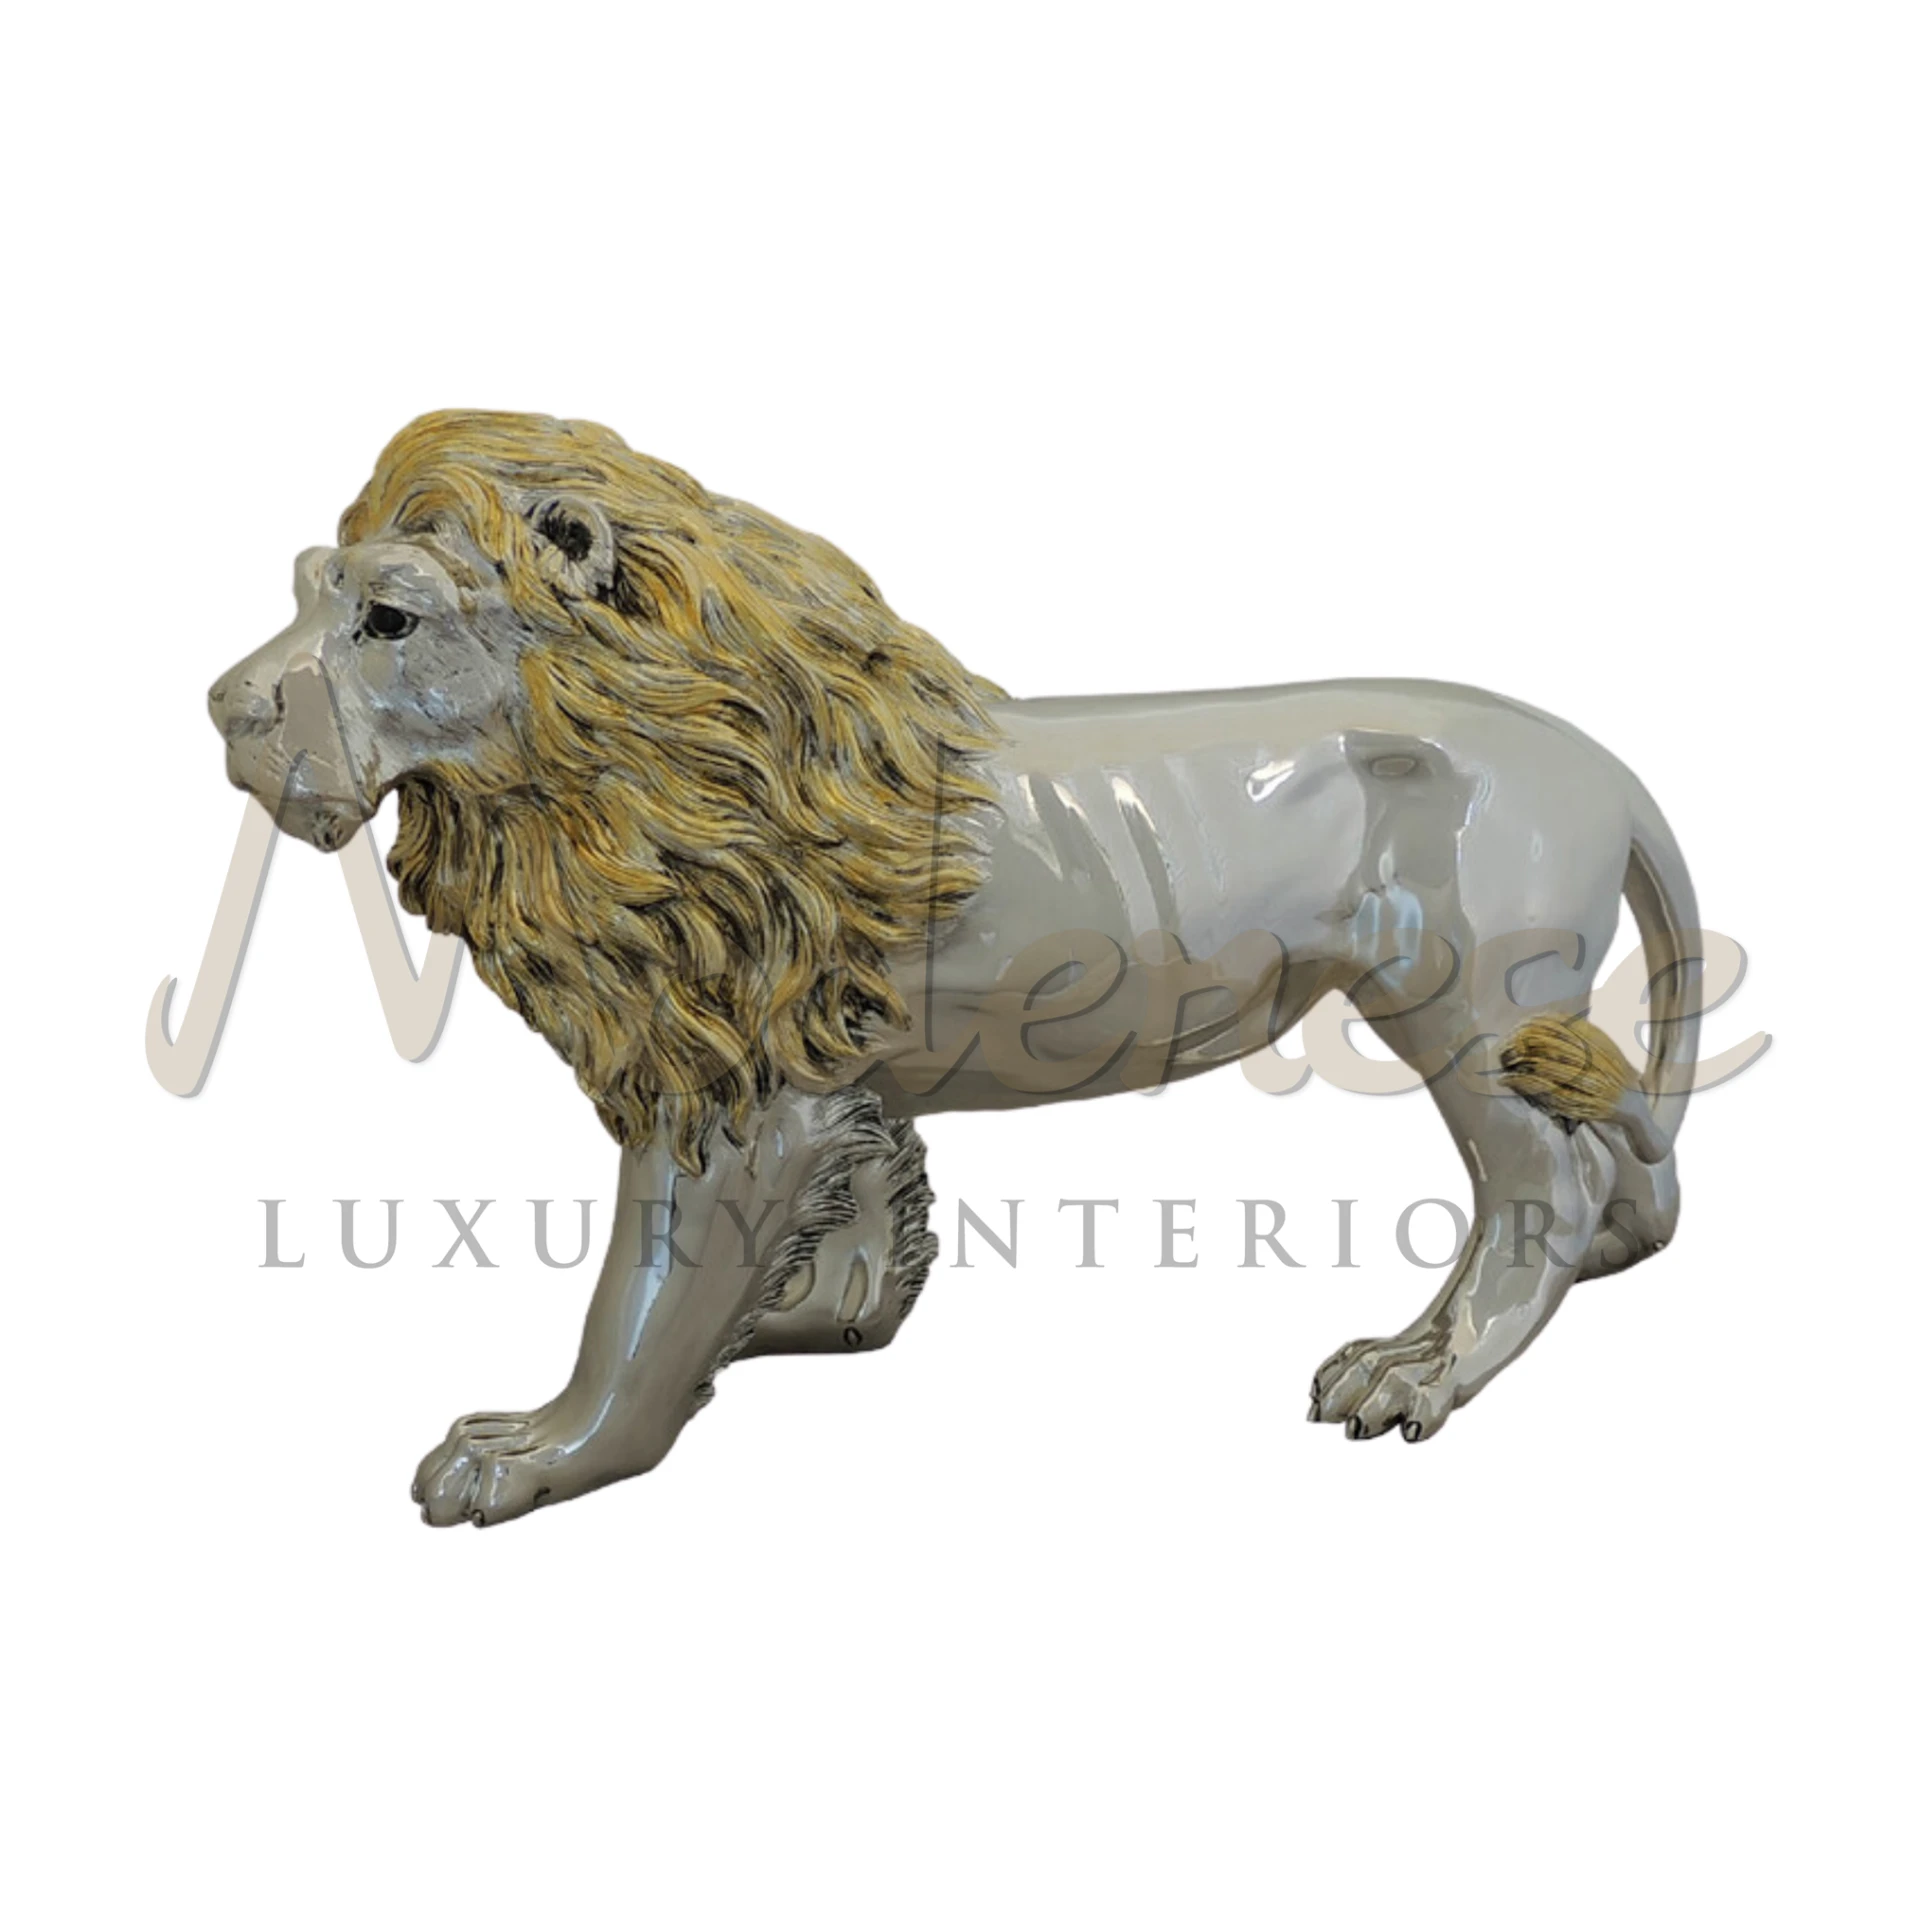 Royal Silver Lion statuette, a luxurious and elegant design symbolizing strength, ideal for classic and baroque style luxury home décor.